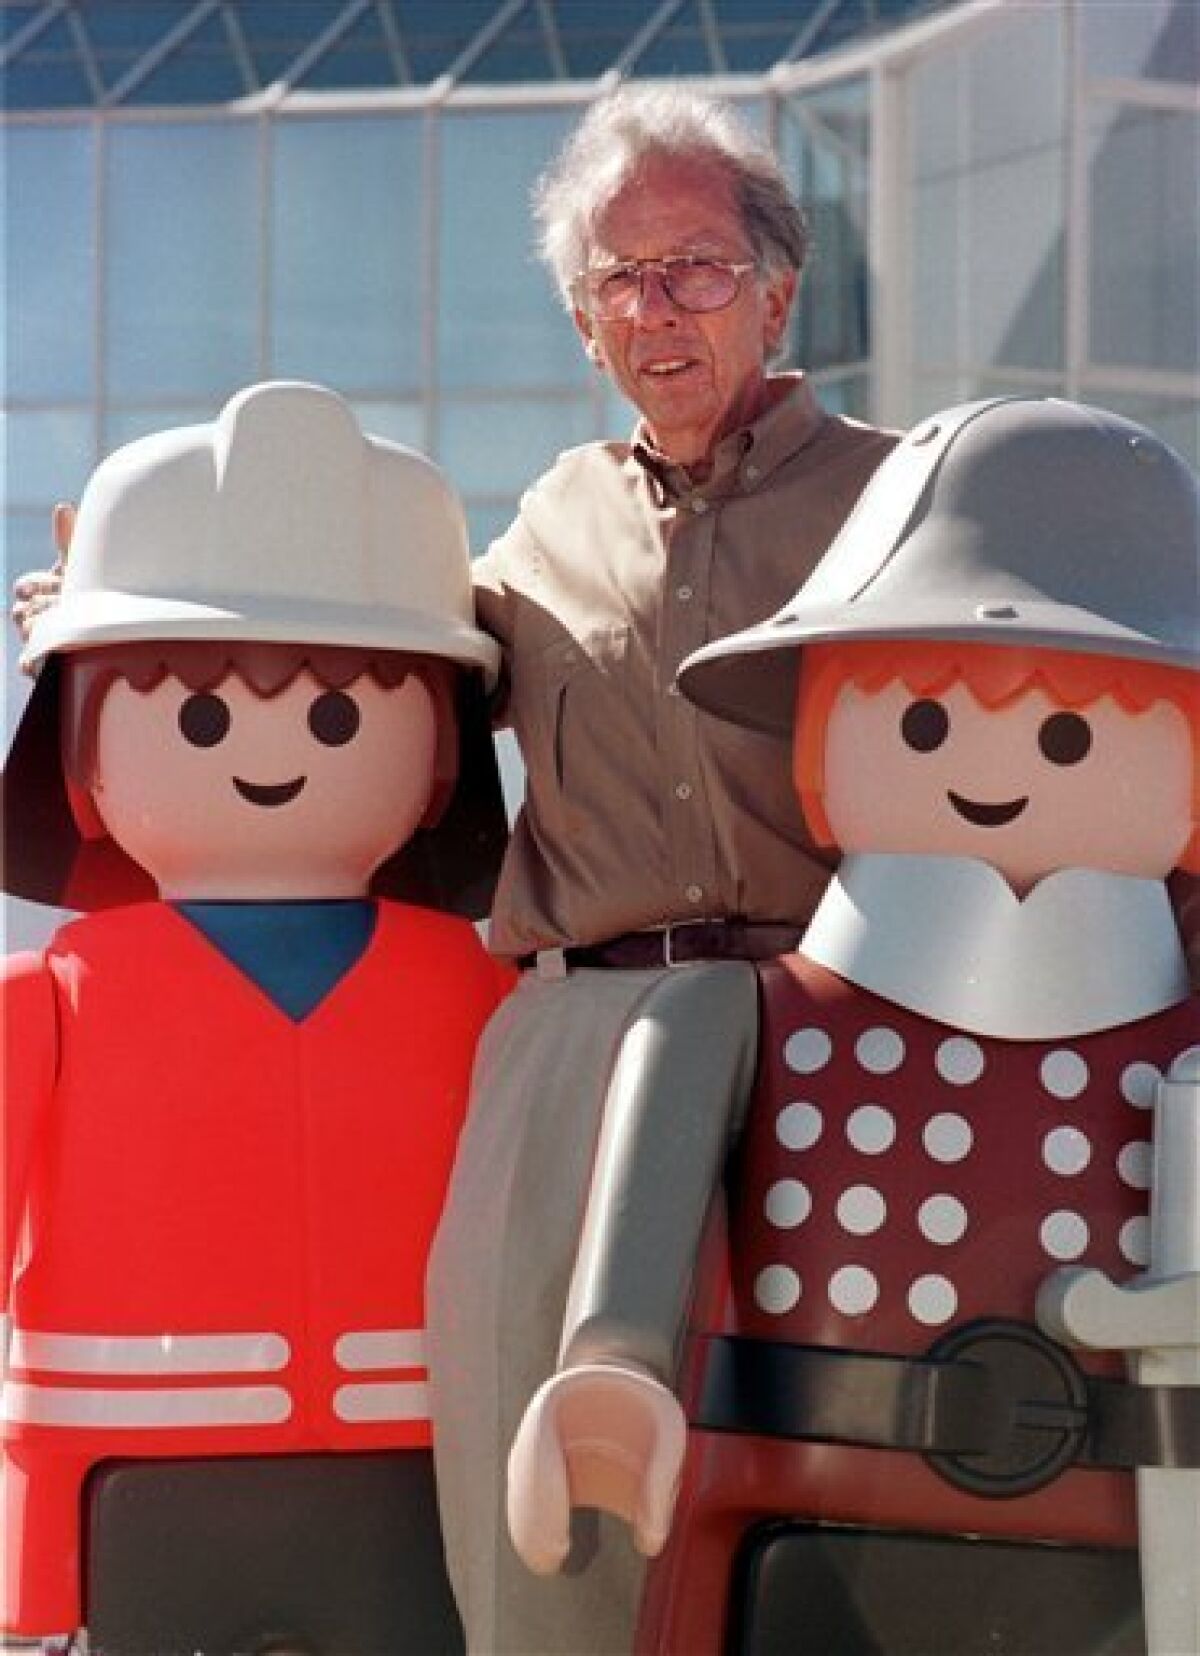 Beck, creator of Playmobil toys, dead at 79 - The San Diego Union-Tribune